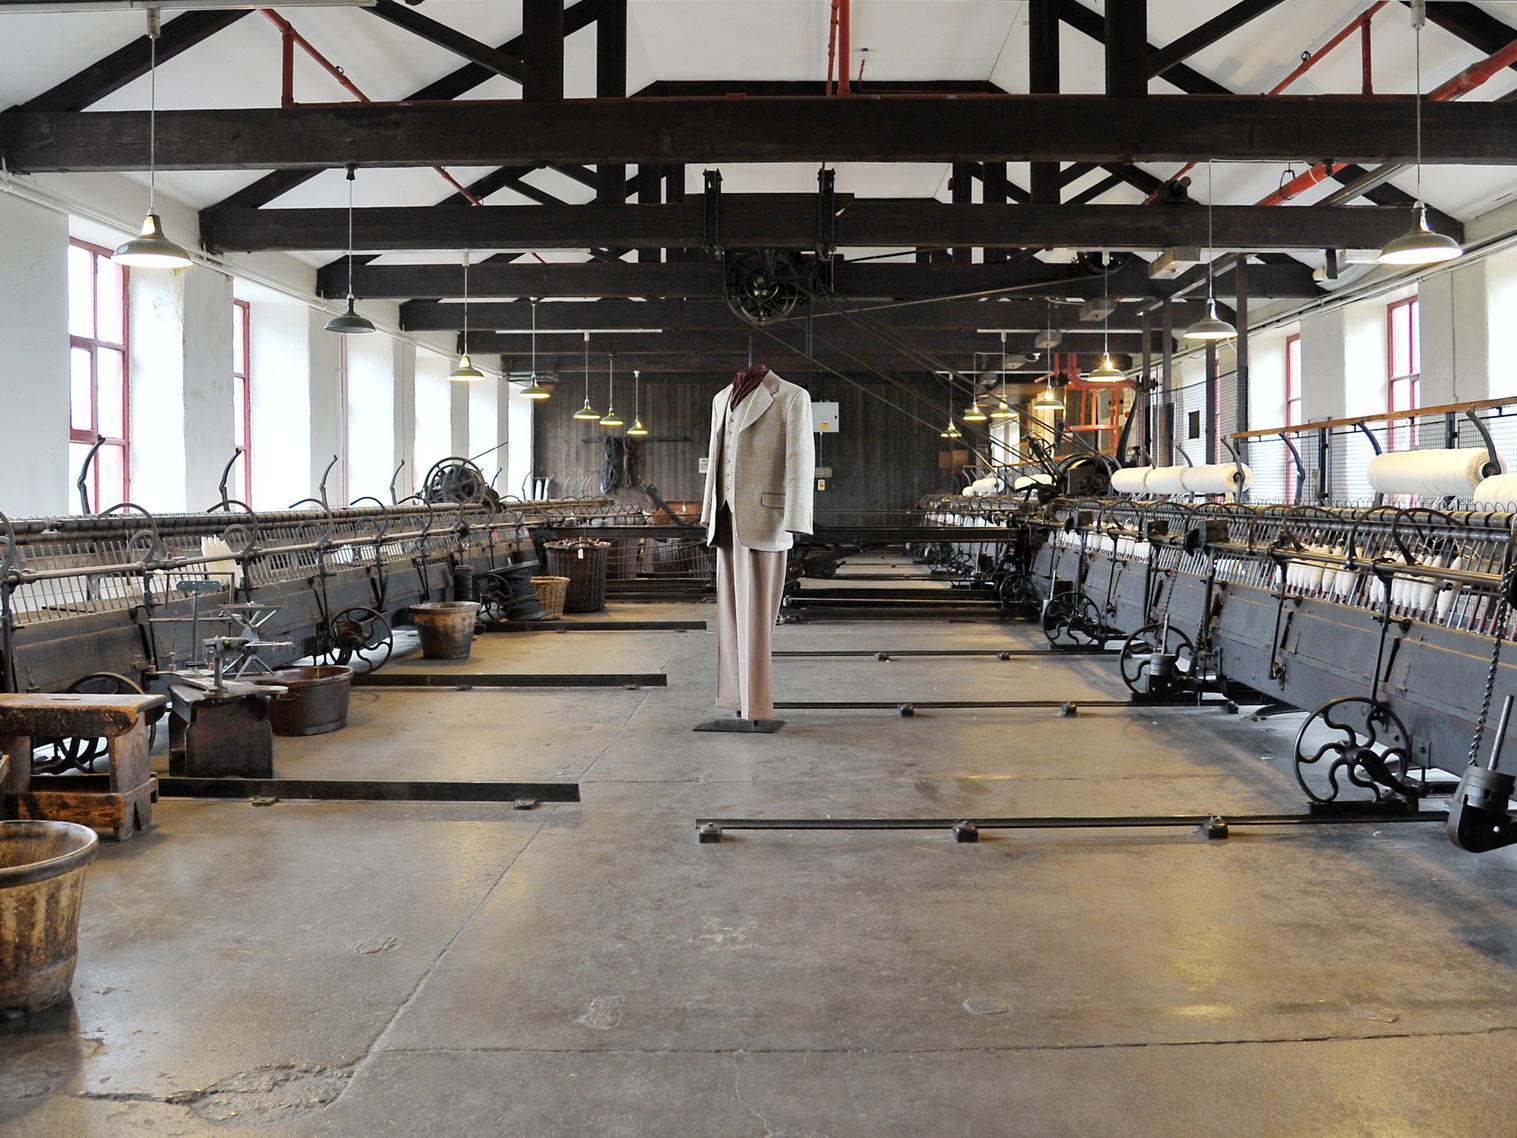 The pair of enormous woollen spinning mules were both manufactured by Platt Brothers and Co in Oldham and date from 1871 and 1904, when they were used to spin textile fibres into yarn.